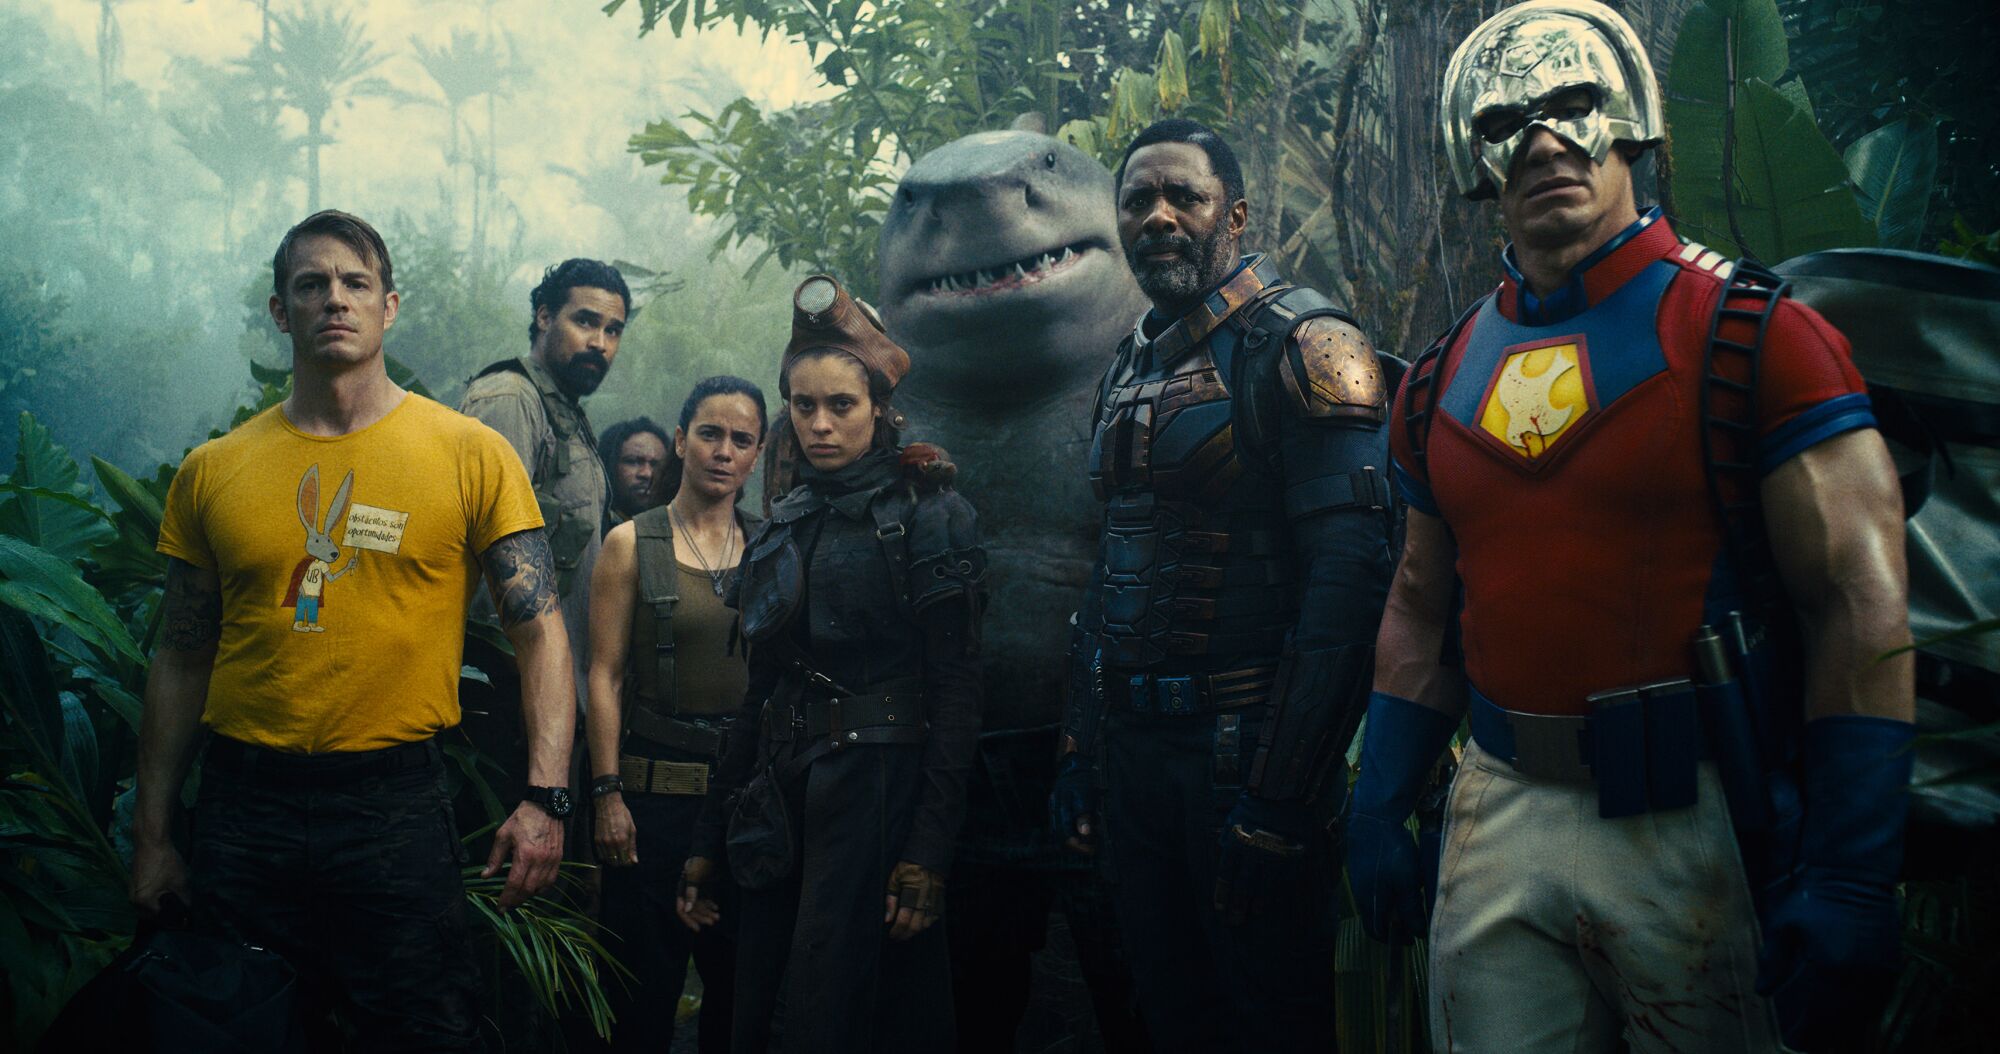 Seven people in combat gear and an anthropomorphic shark standing in a jungle